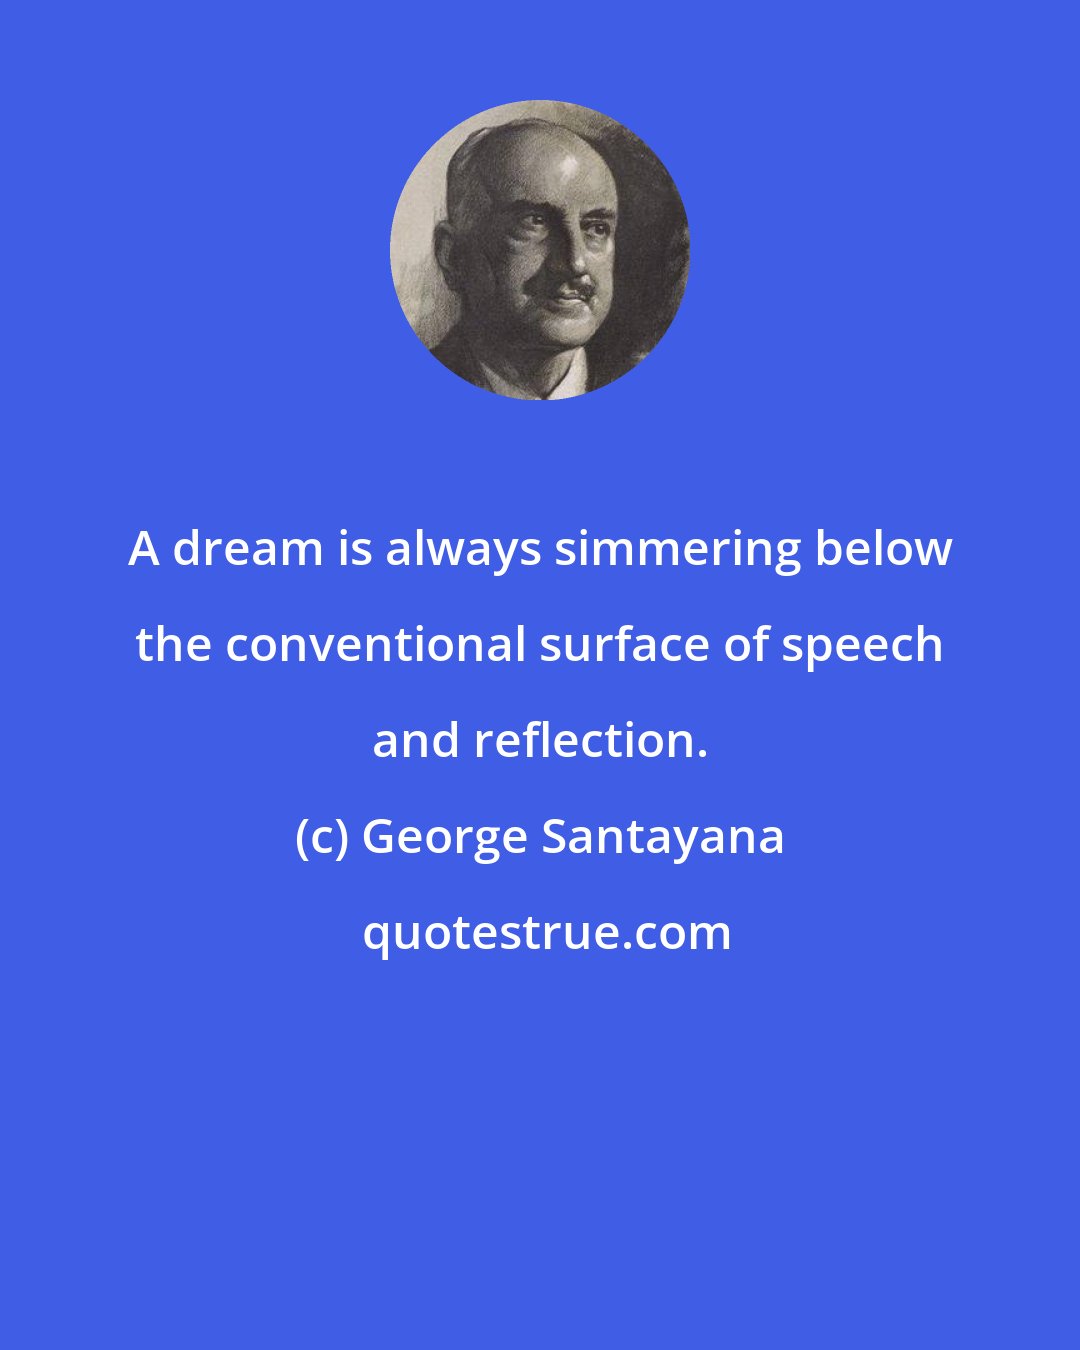 George Santayana: A dream is always simmering below the conventional surface of speech and reflection.